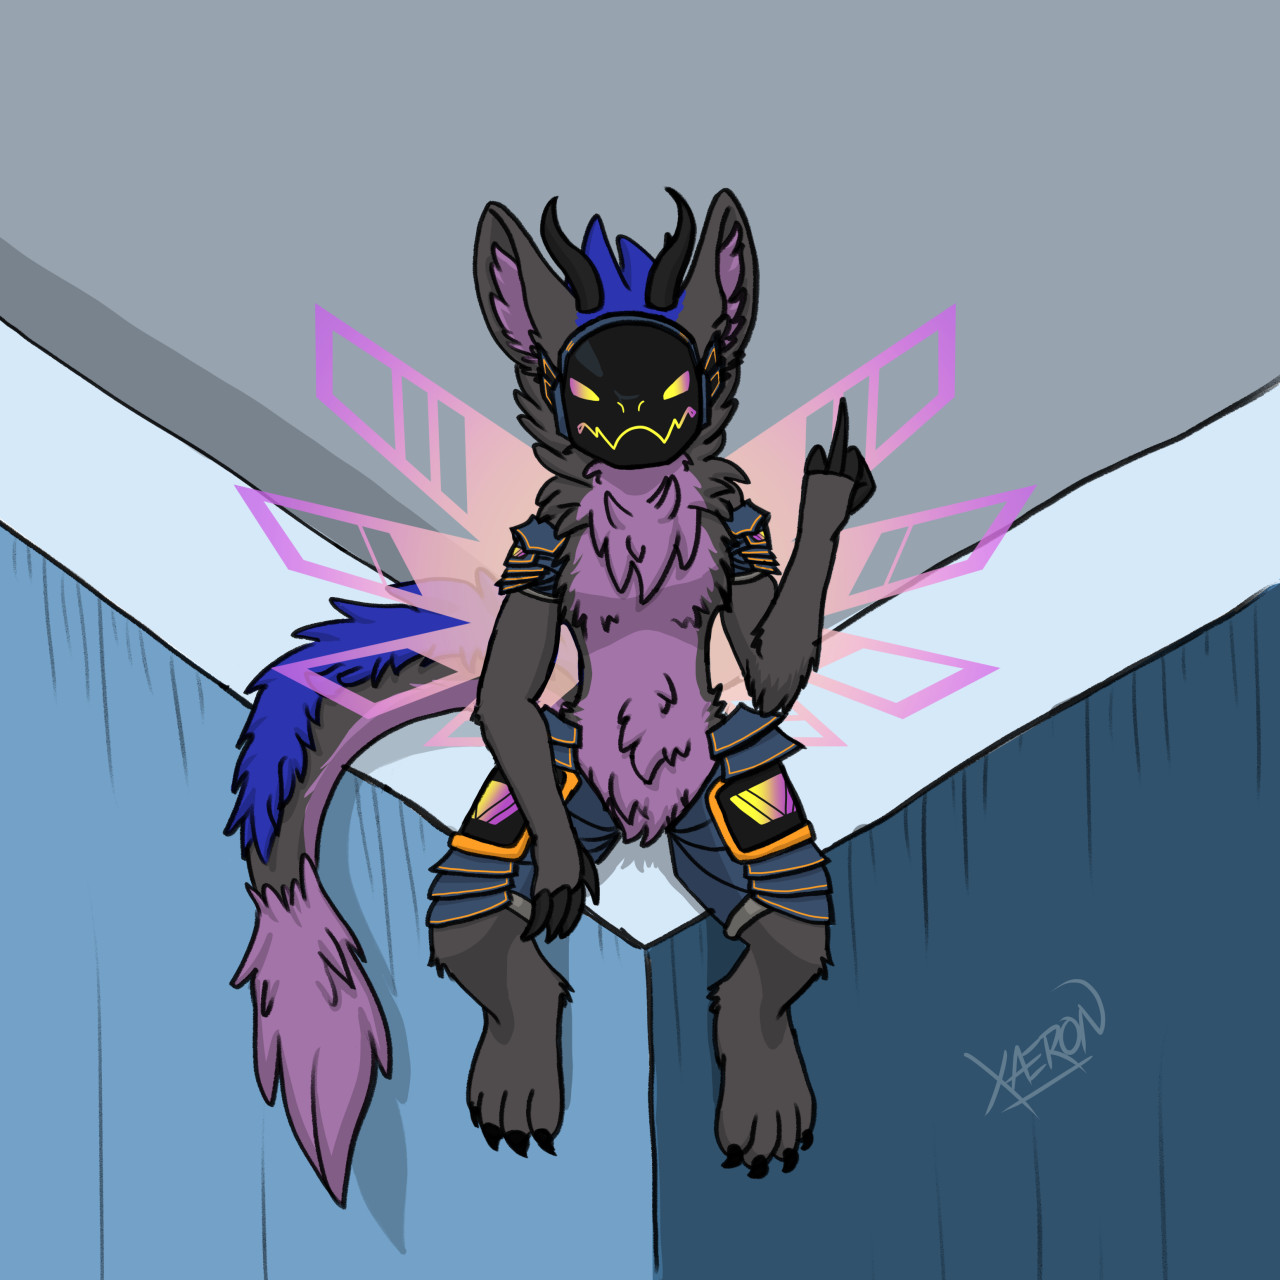 Ares The Protogen by AnnilluArts on Newgrounds